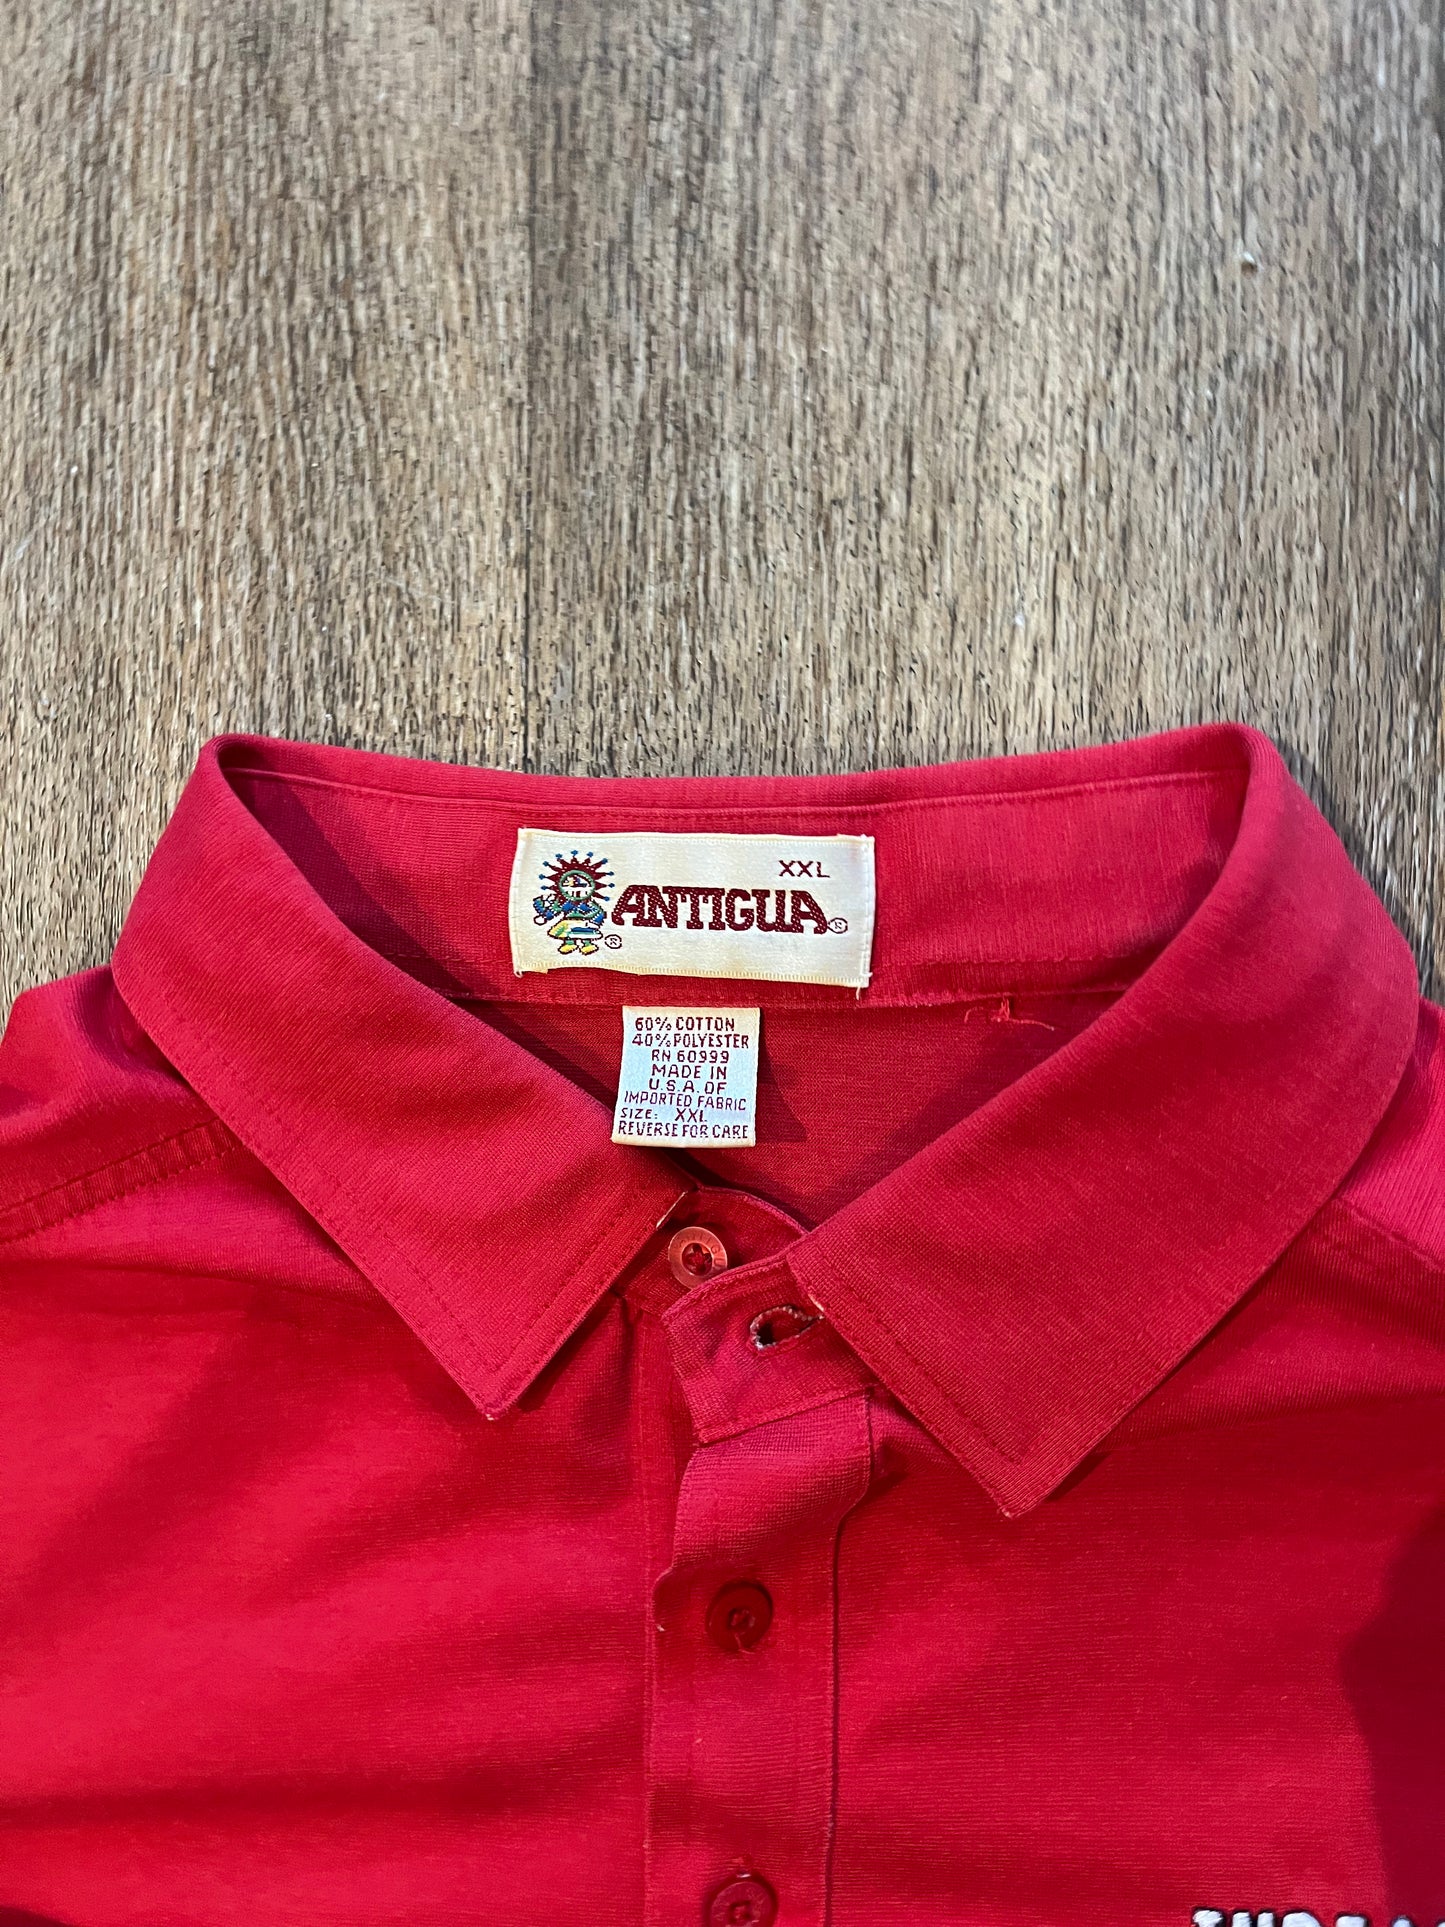 Antigua vintage Indiana Hoosiers 1987 Champs red polo shirt, XXL